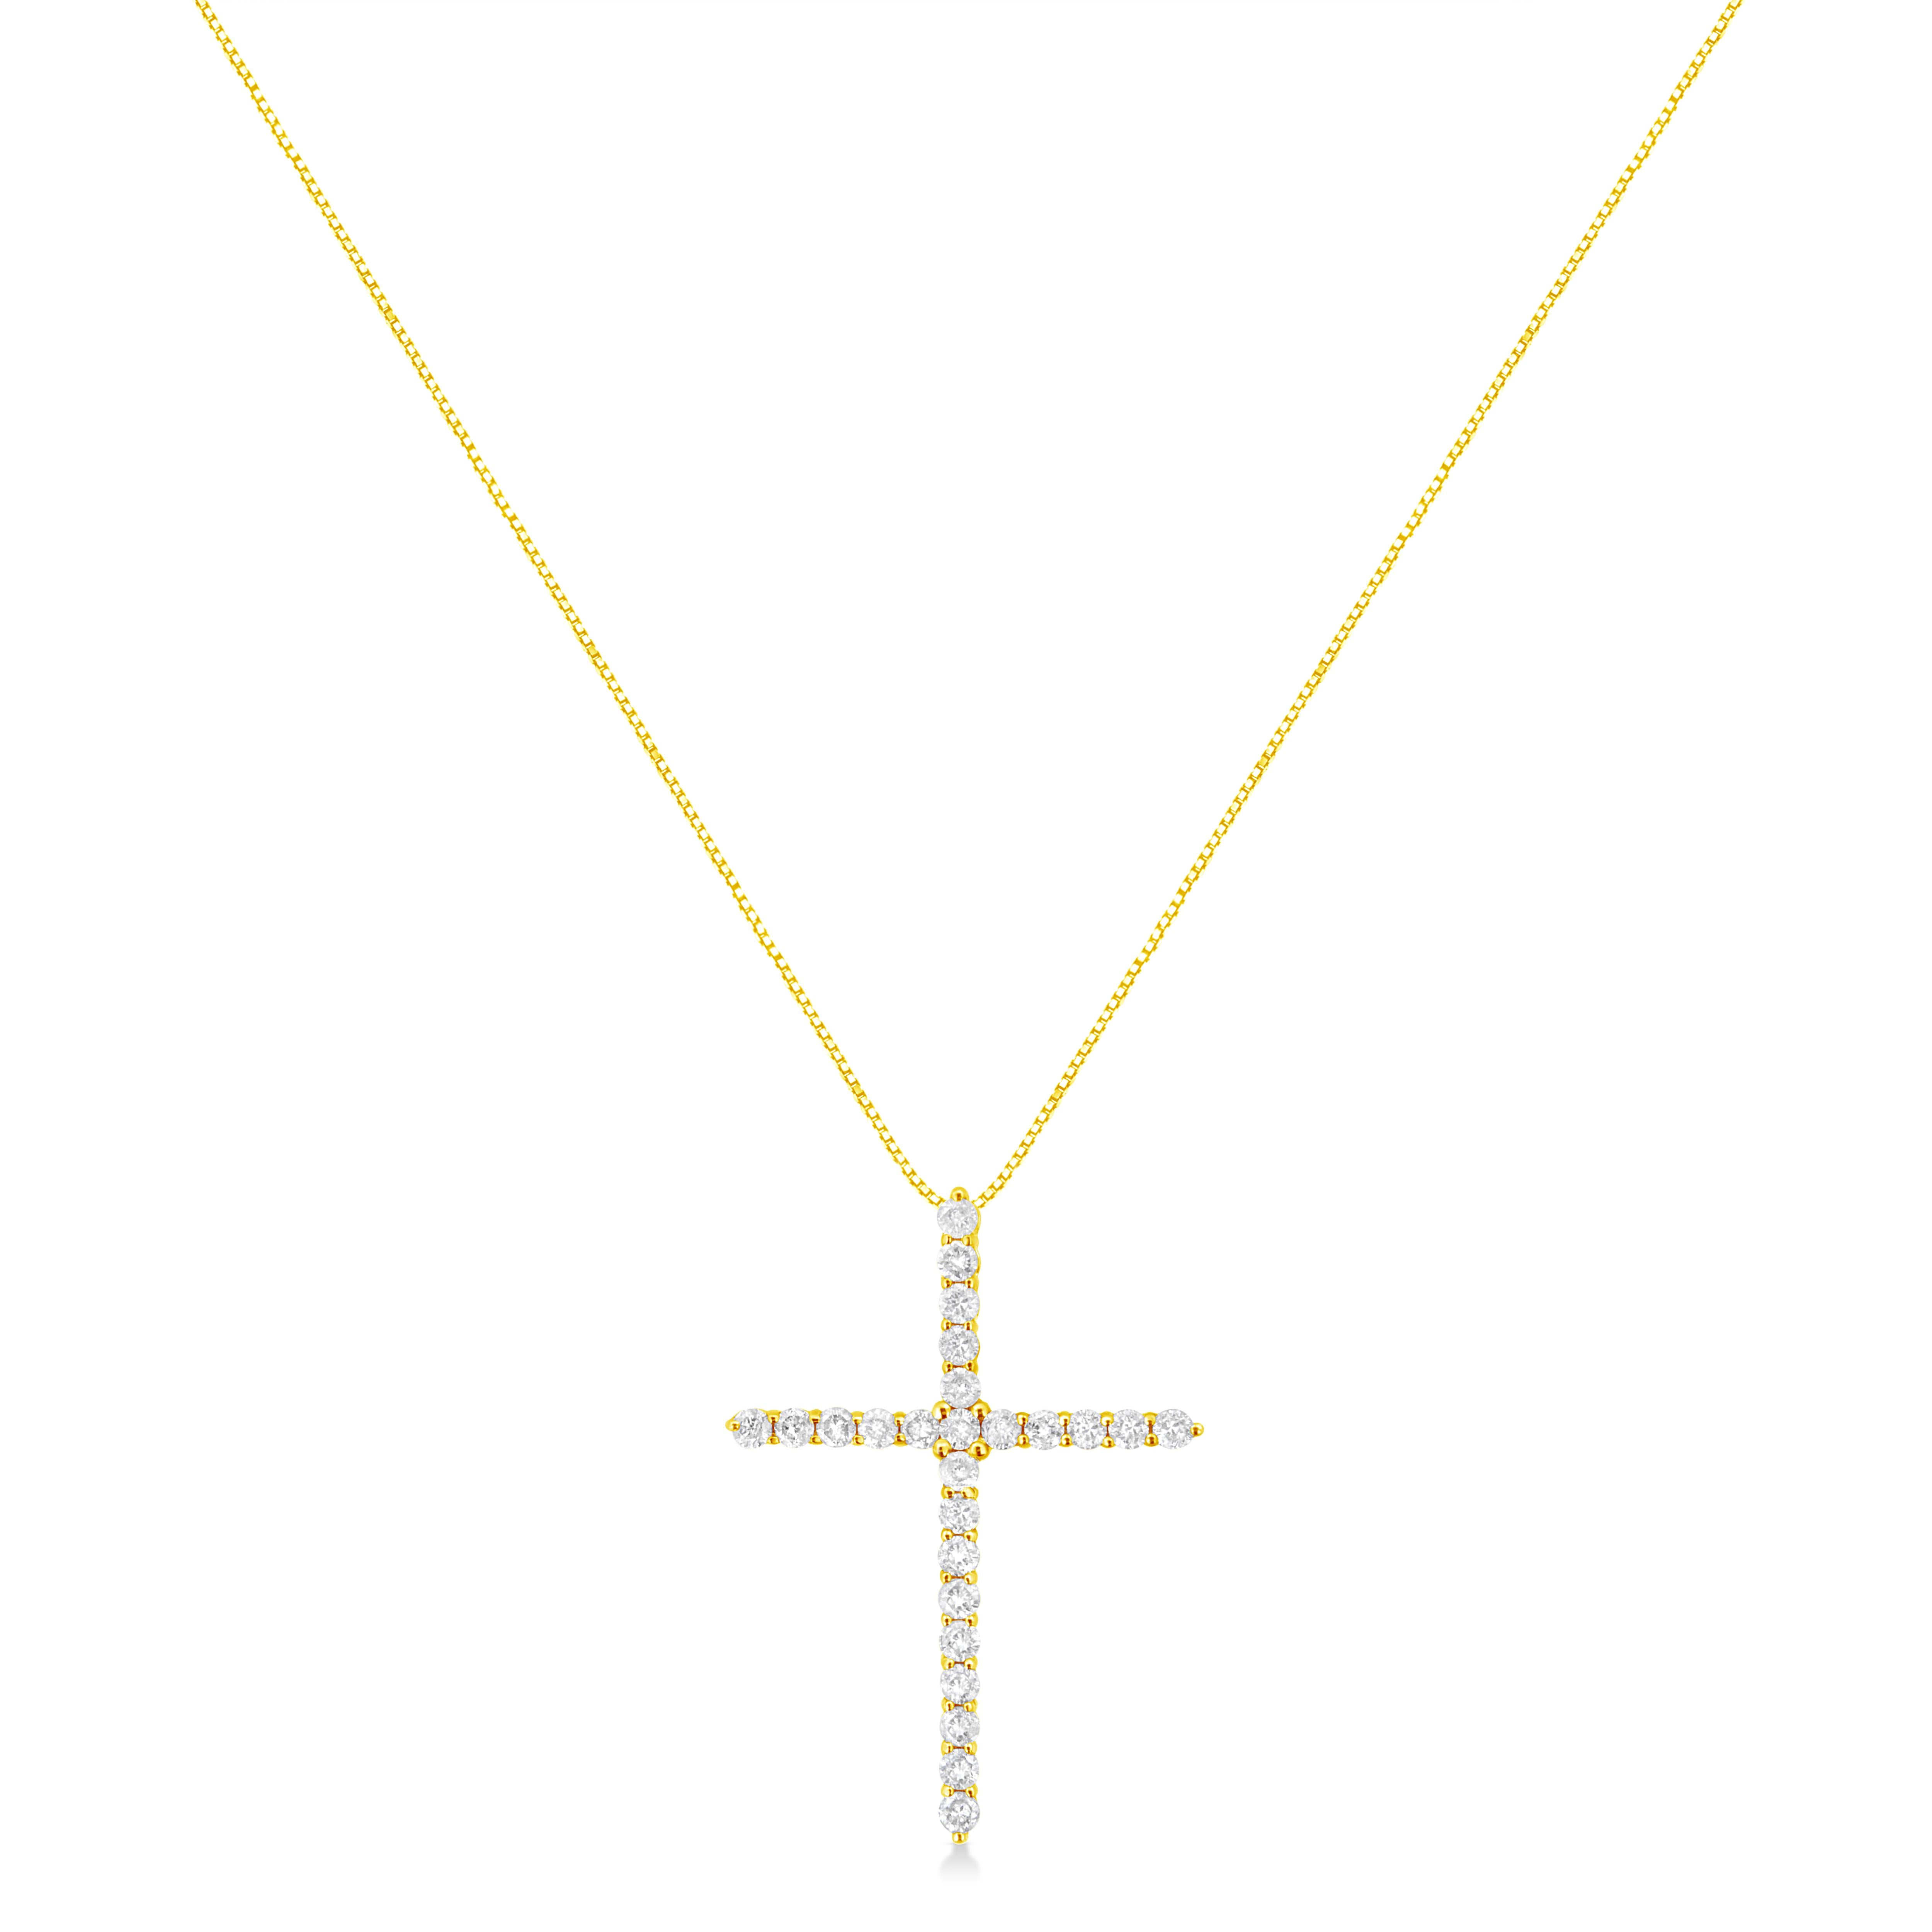 This beautiful piece of jewelry is not only a symbol of devotion and faith but also a true work of art. This gorgeous 10K yellow gold pendant necklace features round, brilliant cut diamonds in a cross design. This diamond cross pendant comes with a